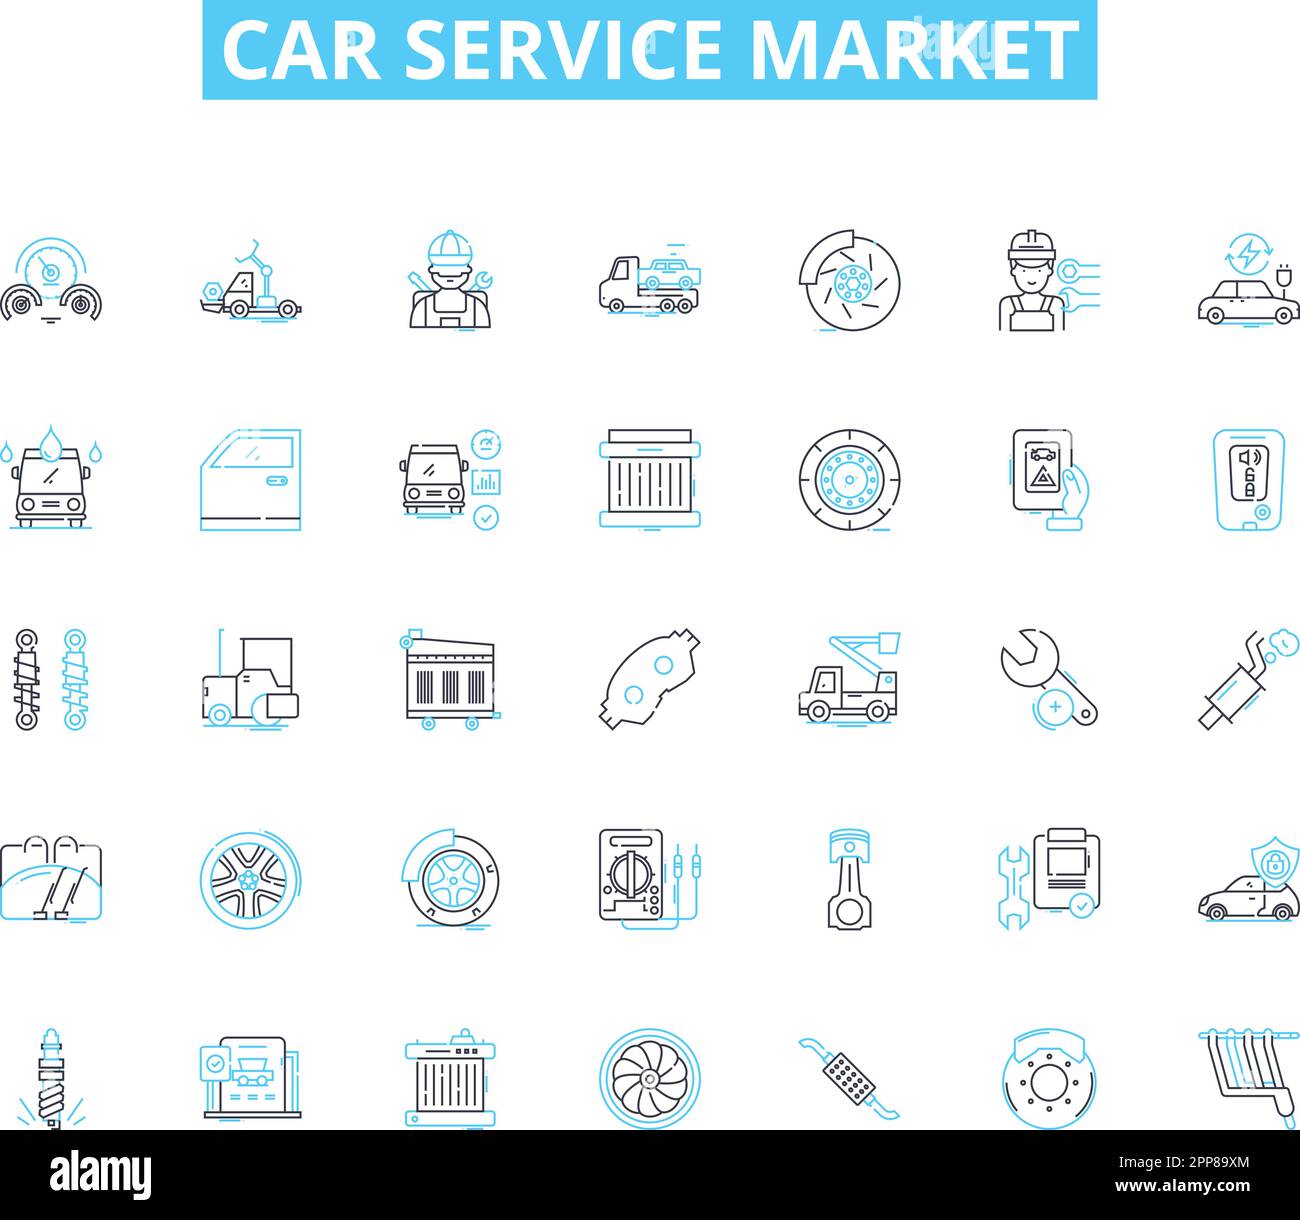 Car service market linear icons set. Maintenance, Repairs, Oil changes, Tires, Brakes, Alignment, Tune up line vector and concept signs. Inspection Stock Vector